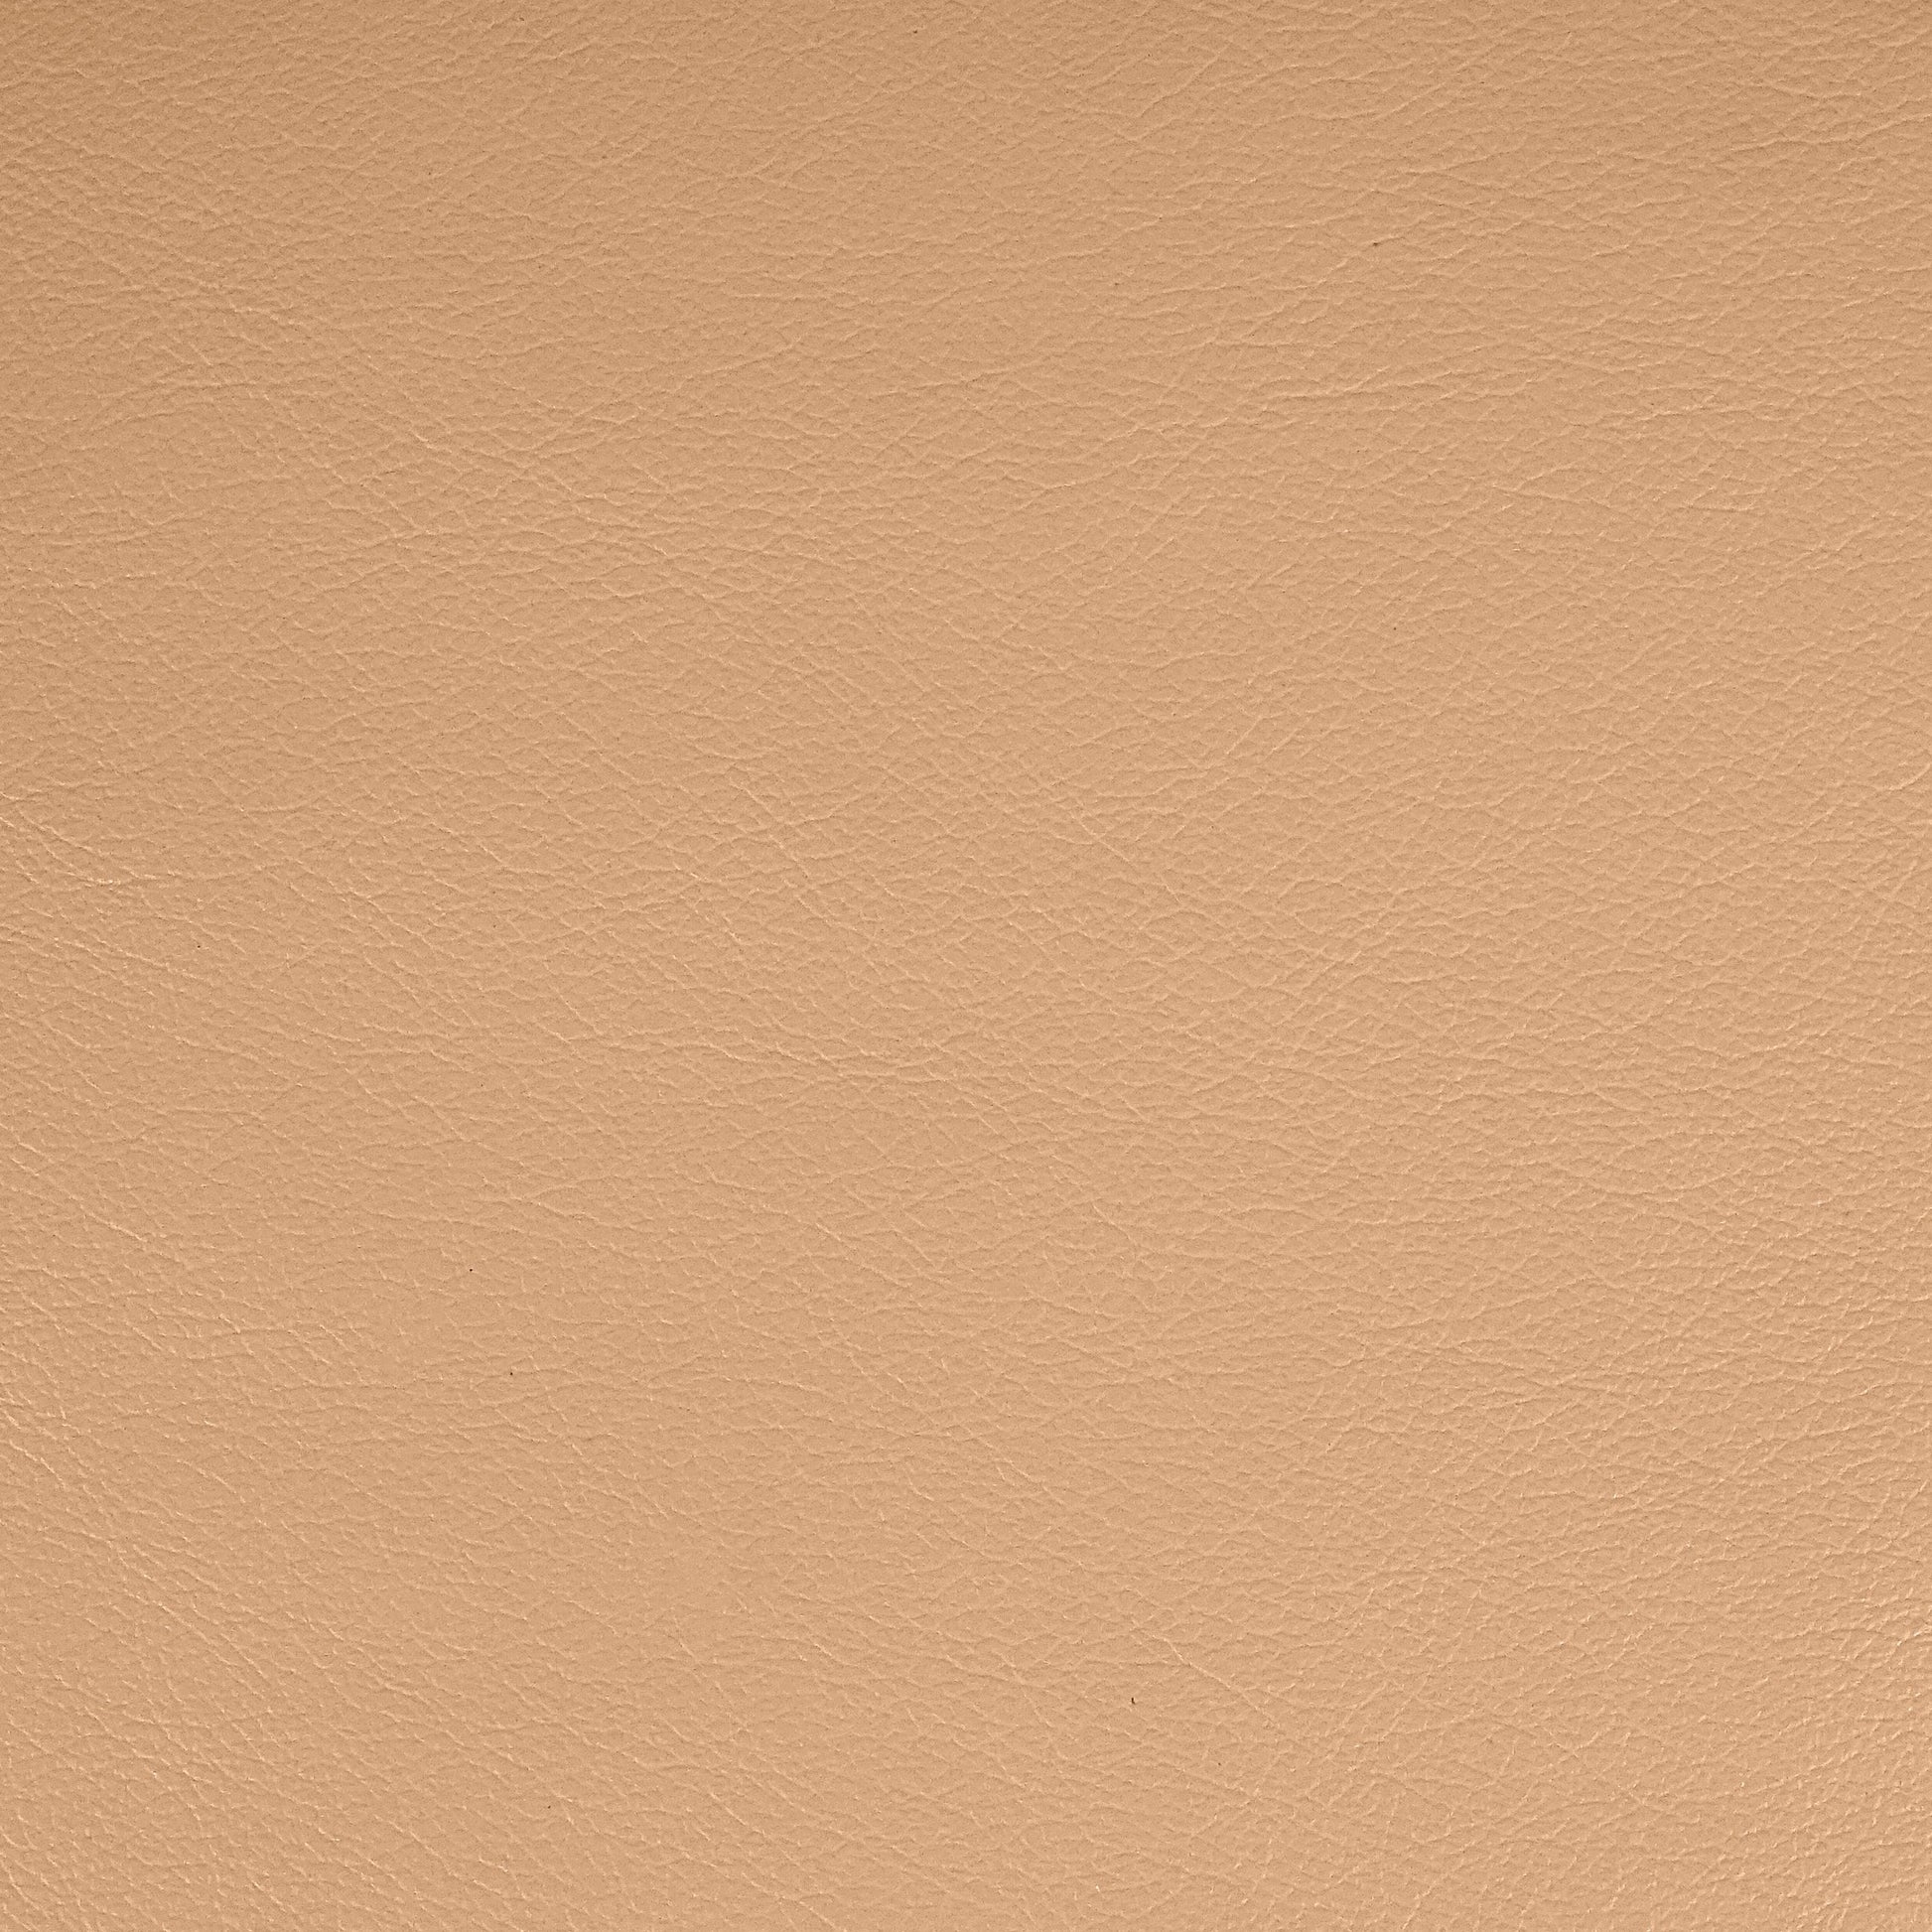 Kismet, Crepe Paper, Iconic® Antimicrobial & Cleanable, Hospitality Leather Hide